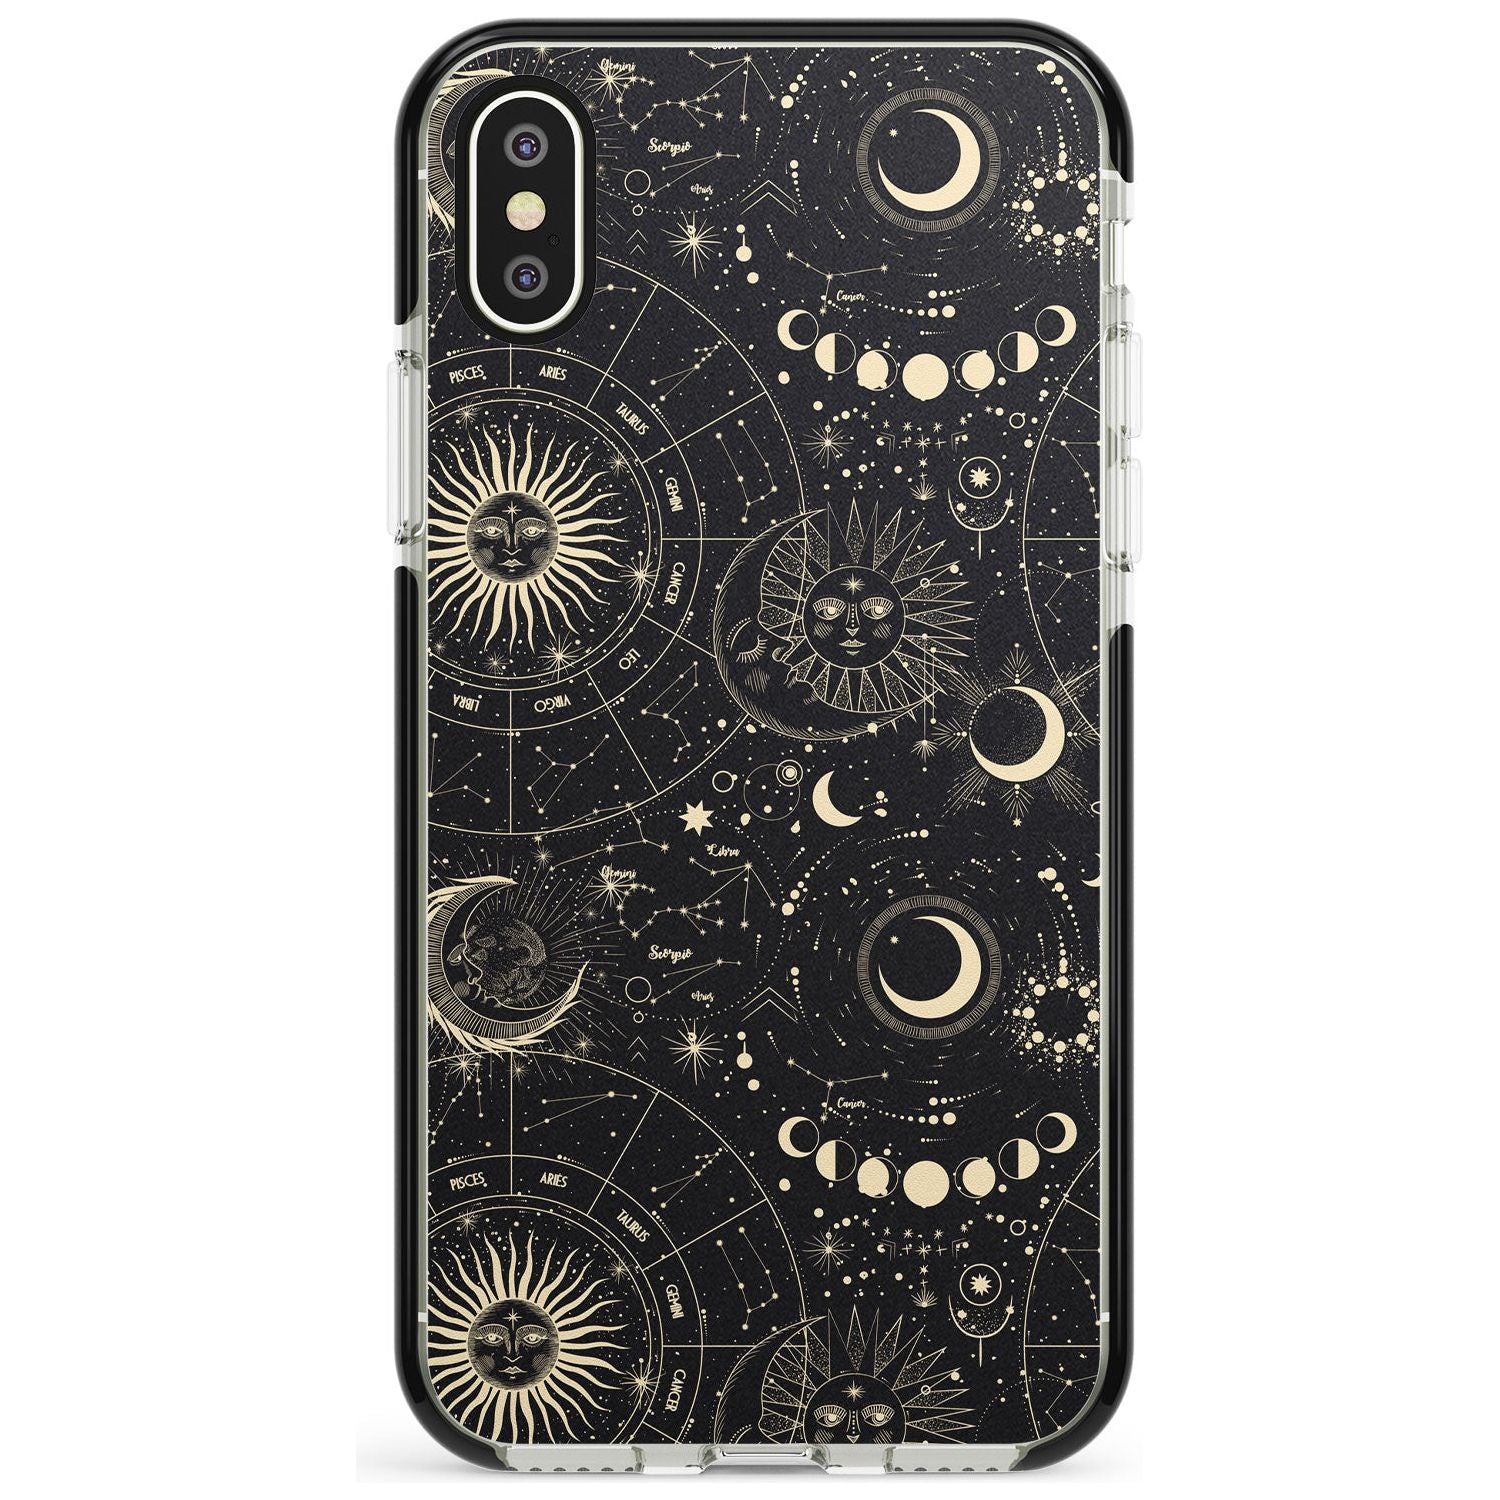 Suns, Moons & Star Signs Pink Fade Impact Phone Case for iPhone X XS Max XR